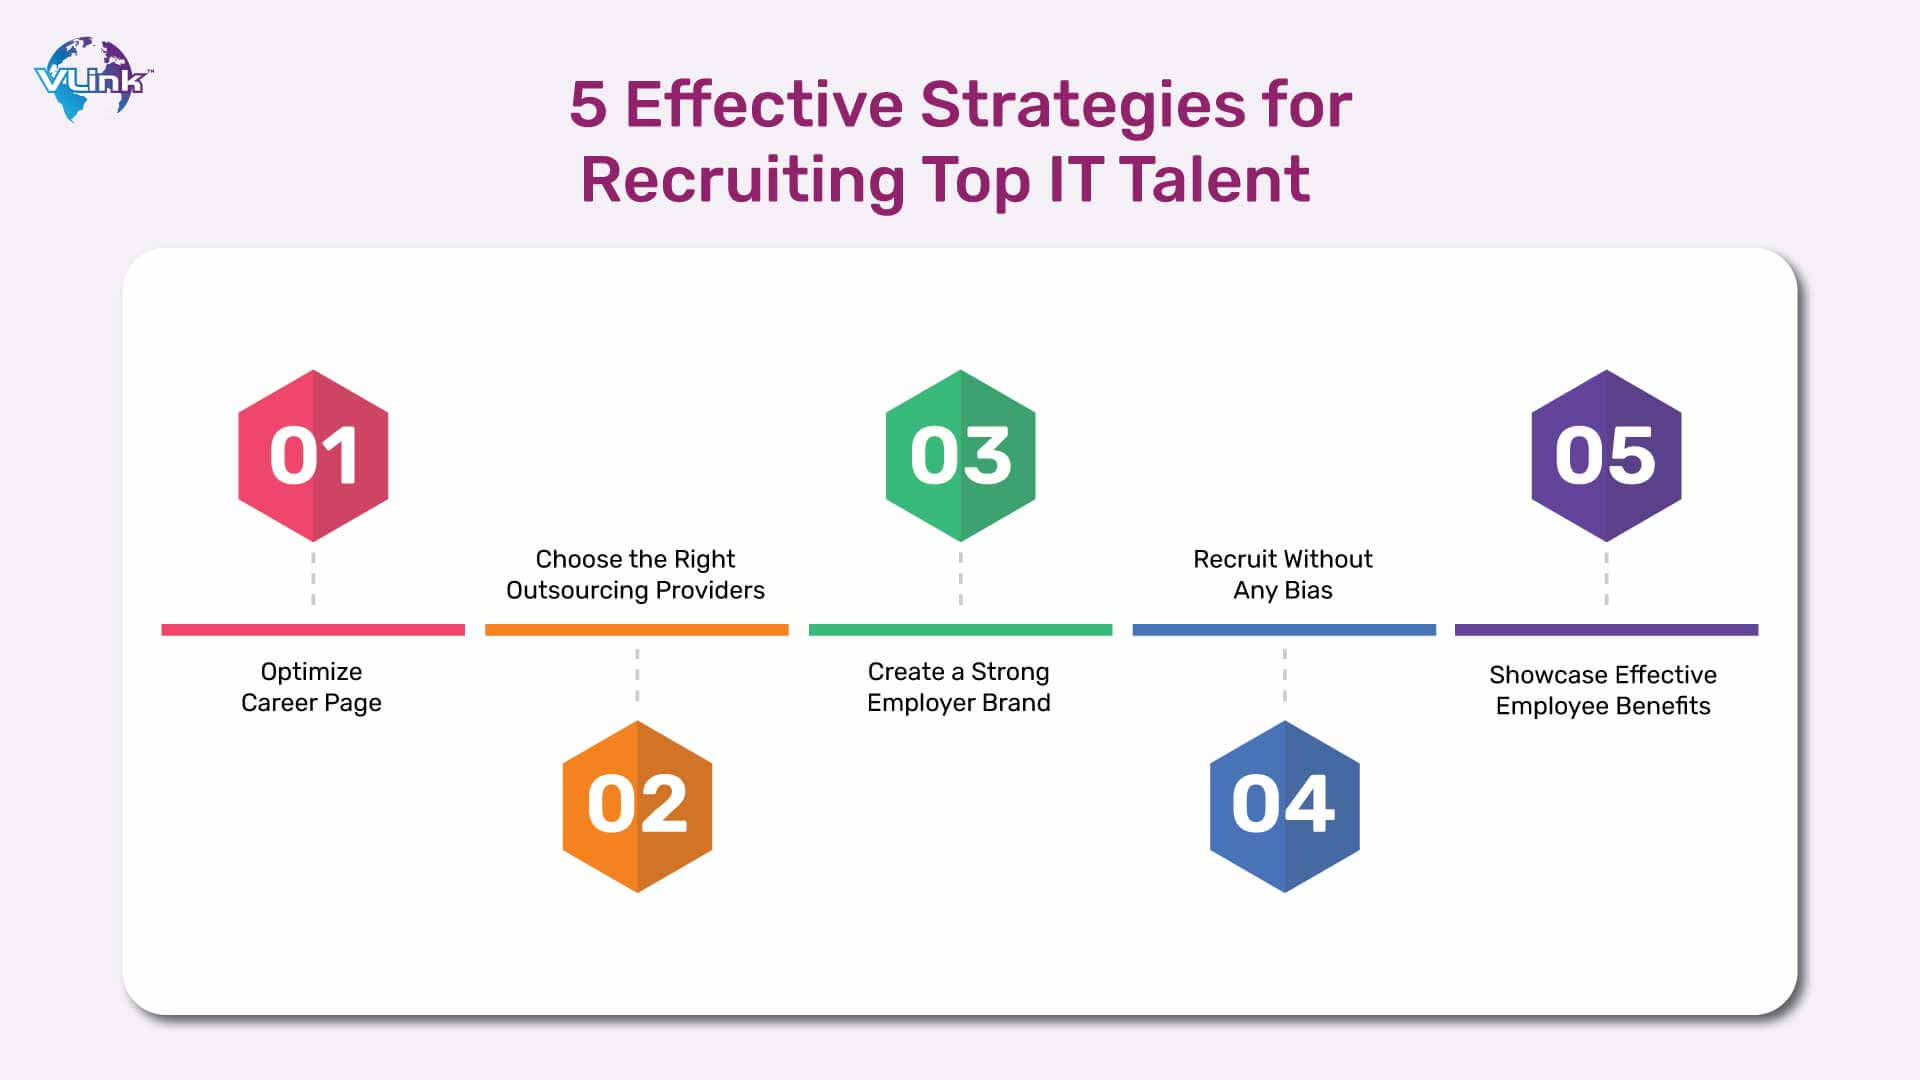 5 Effective Strategies for Recruiting Top IT Talent